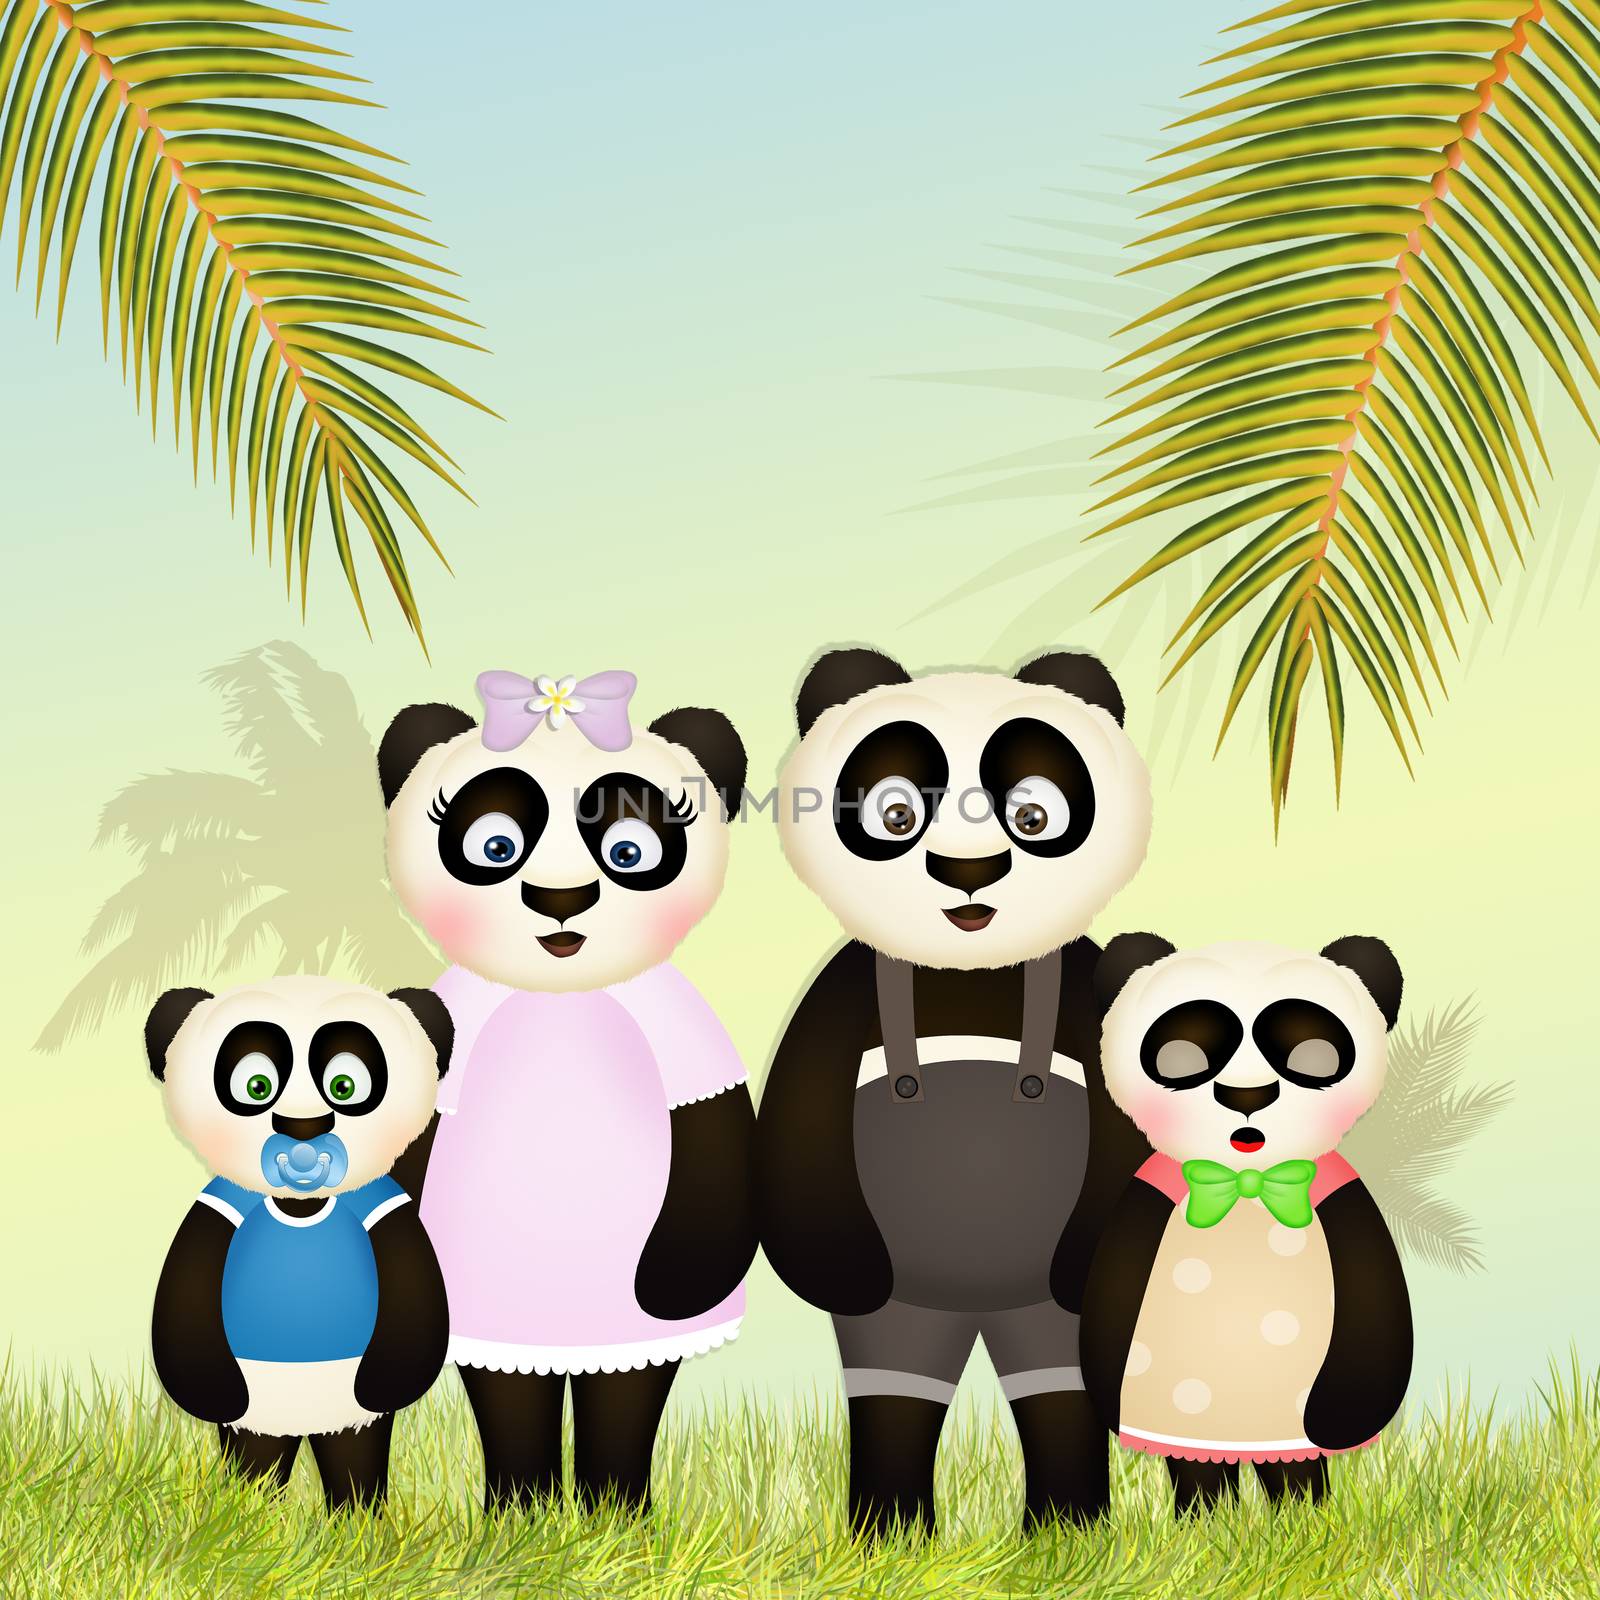 pandas in the jungle by adrenalina